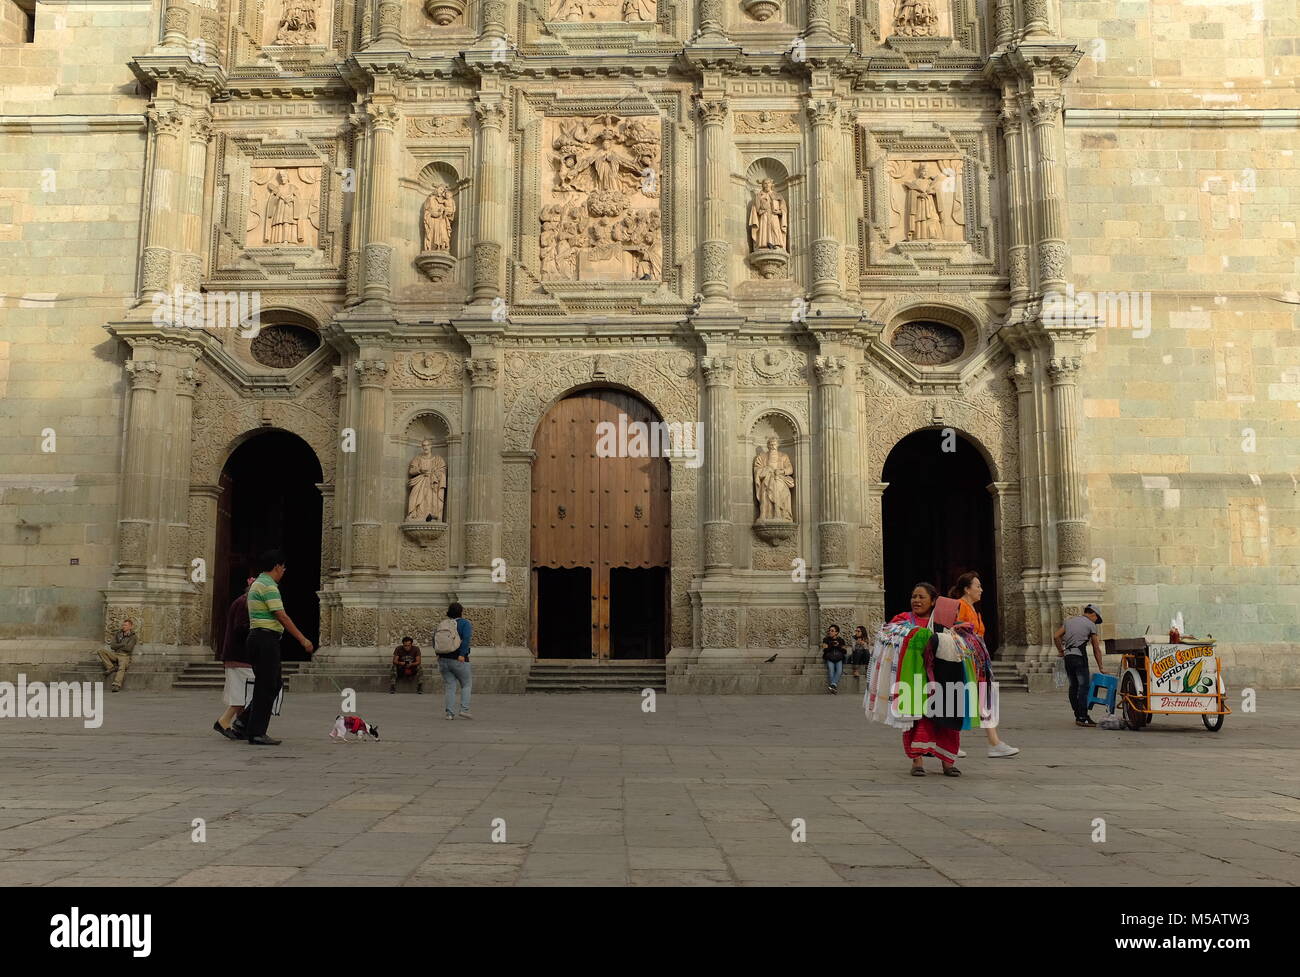 People individually making their way through the day as their paths cross in front of the iconic Cathedral of Our Lady of the Assumption in Oaxaca. Stock Photo